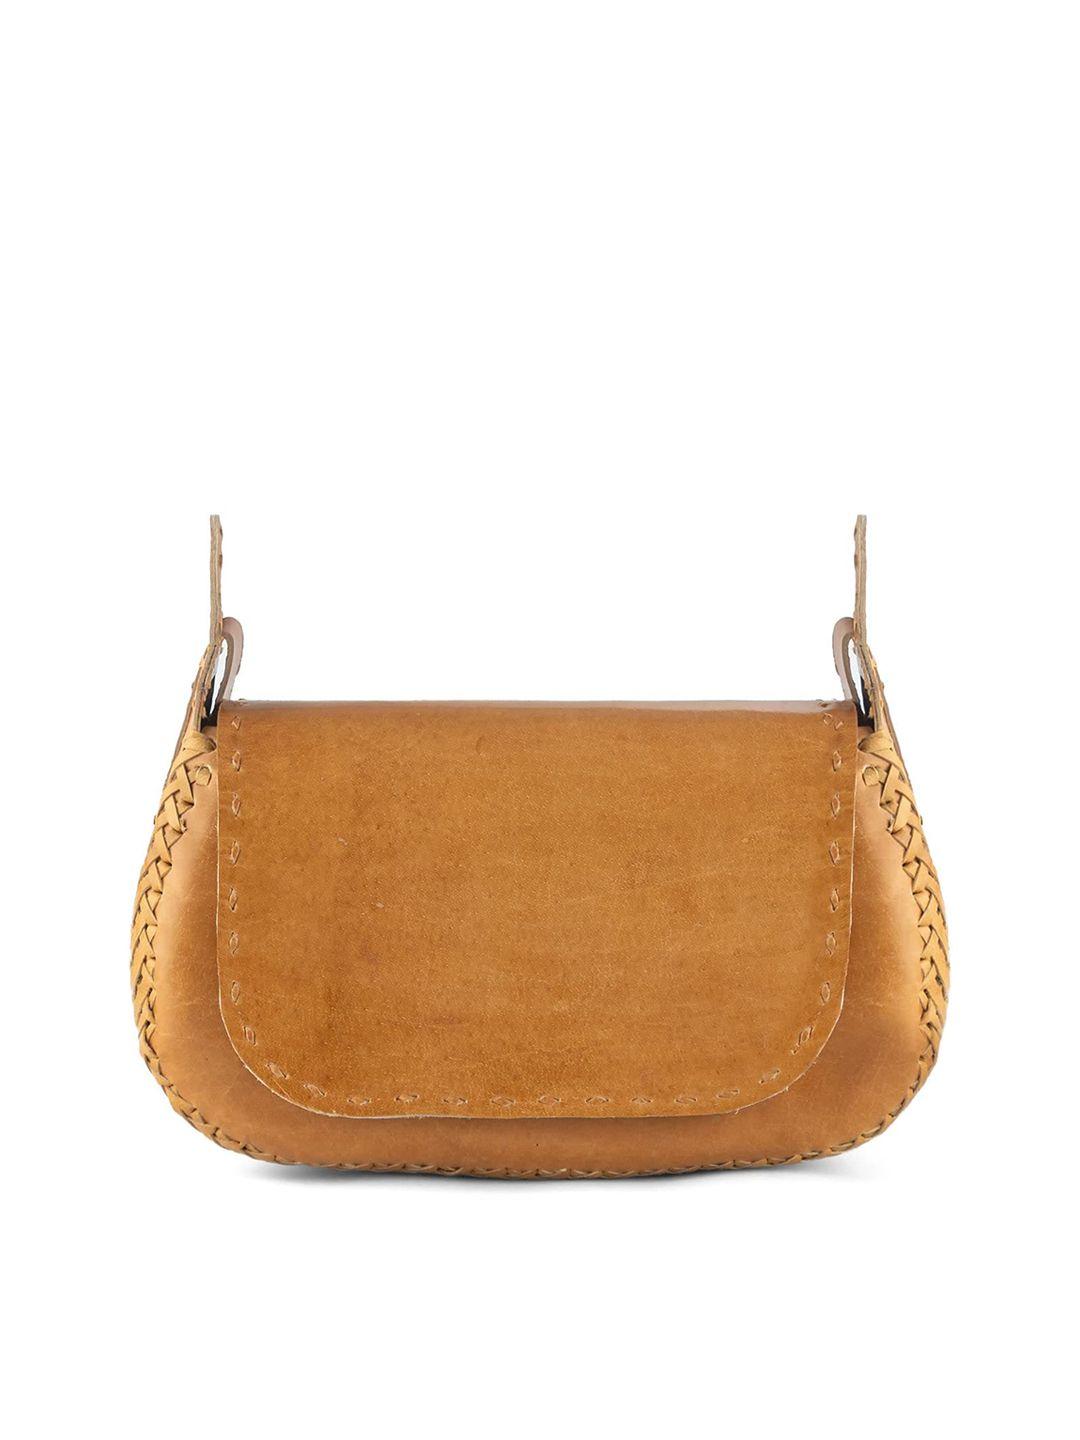 goatter tan leather structured sling bag with tasselled